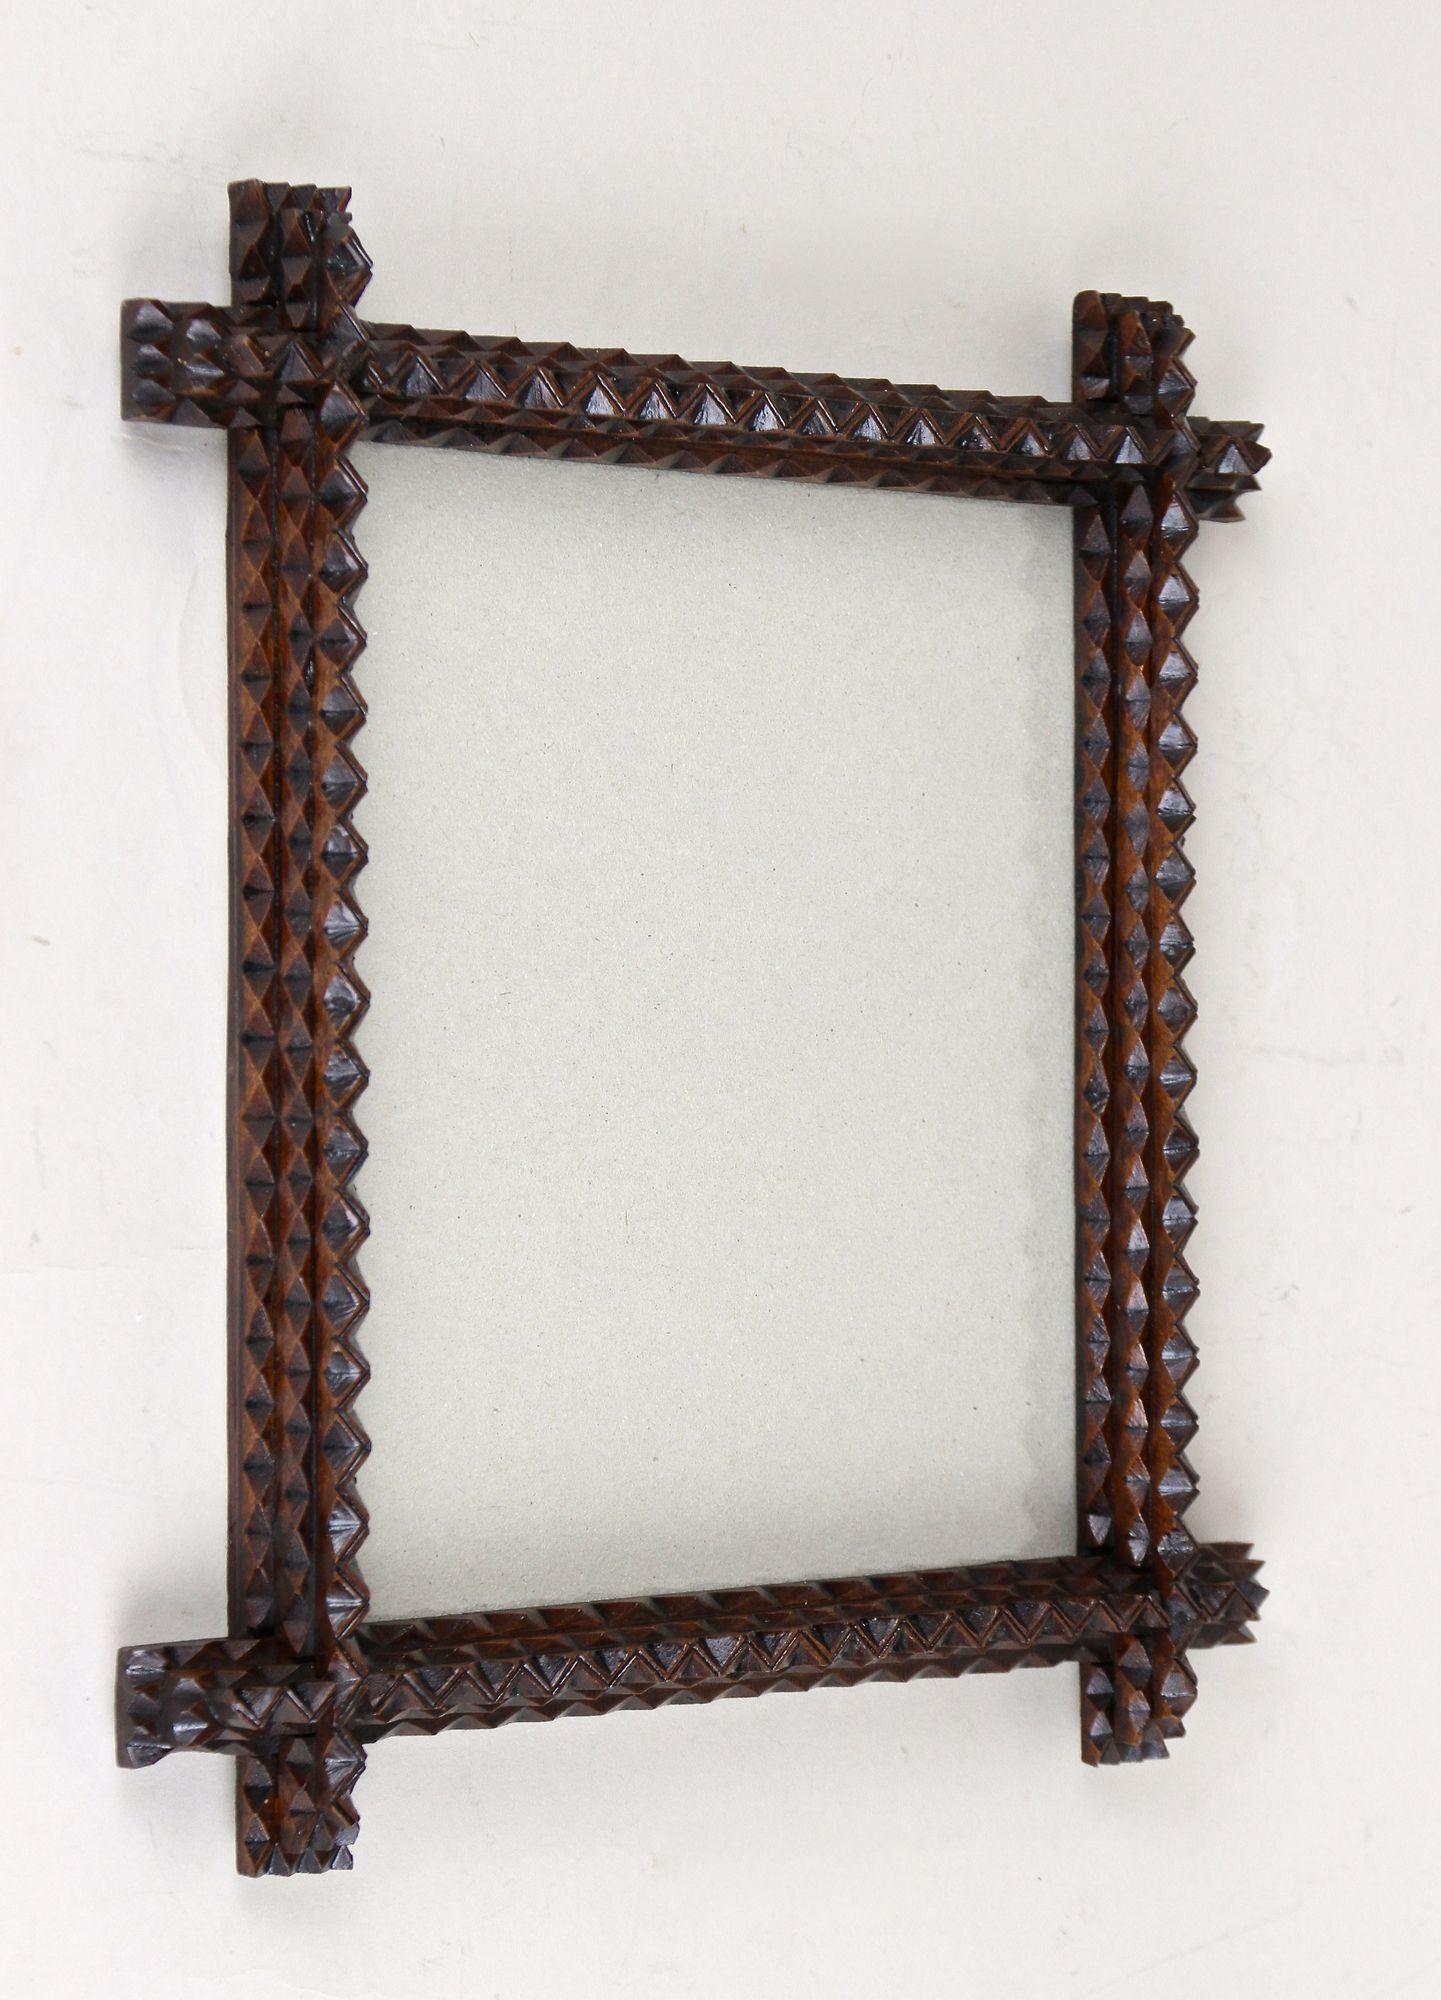 Lovely Tramp Art photo frame from the period in Austria around 1880. Elaborately hand carved out of bass this antique photo frame shows the beautiful so-called 